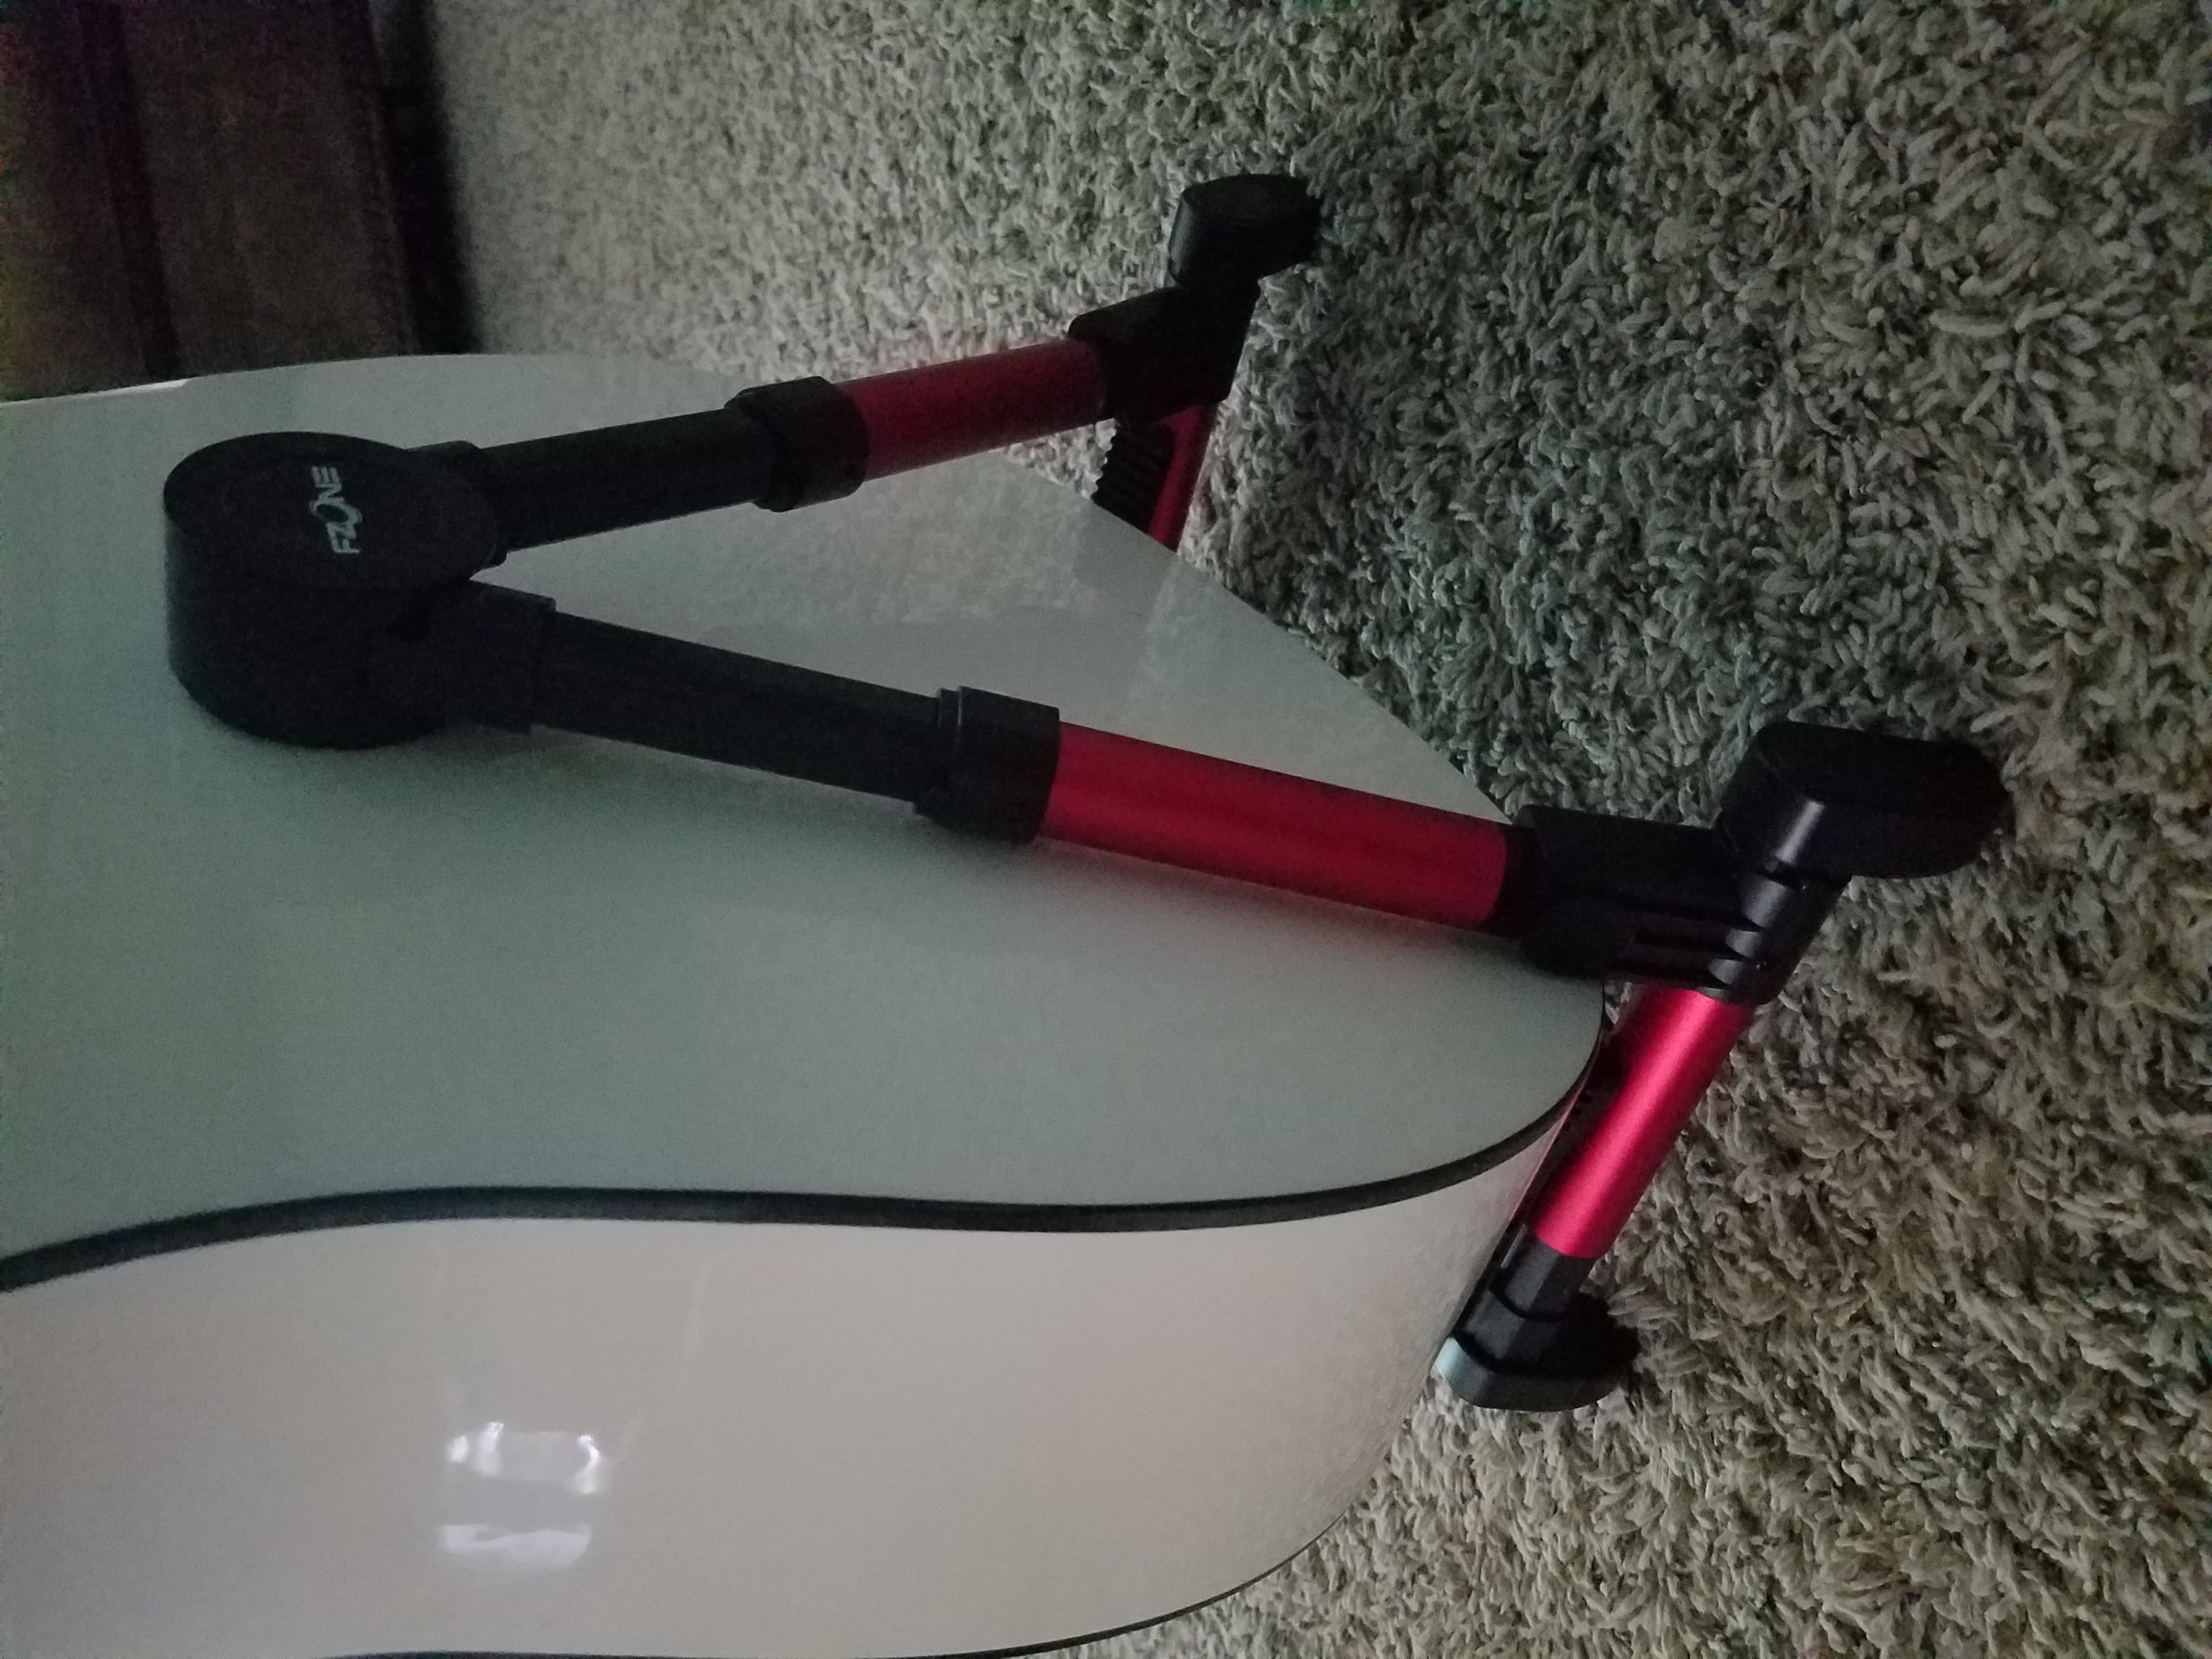 Red guitar stand